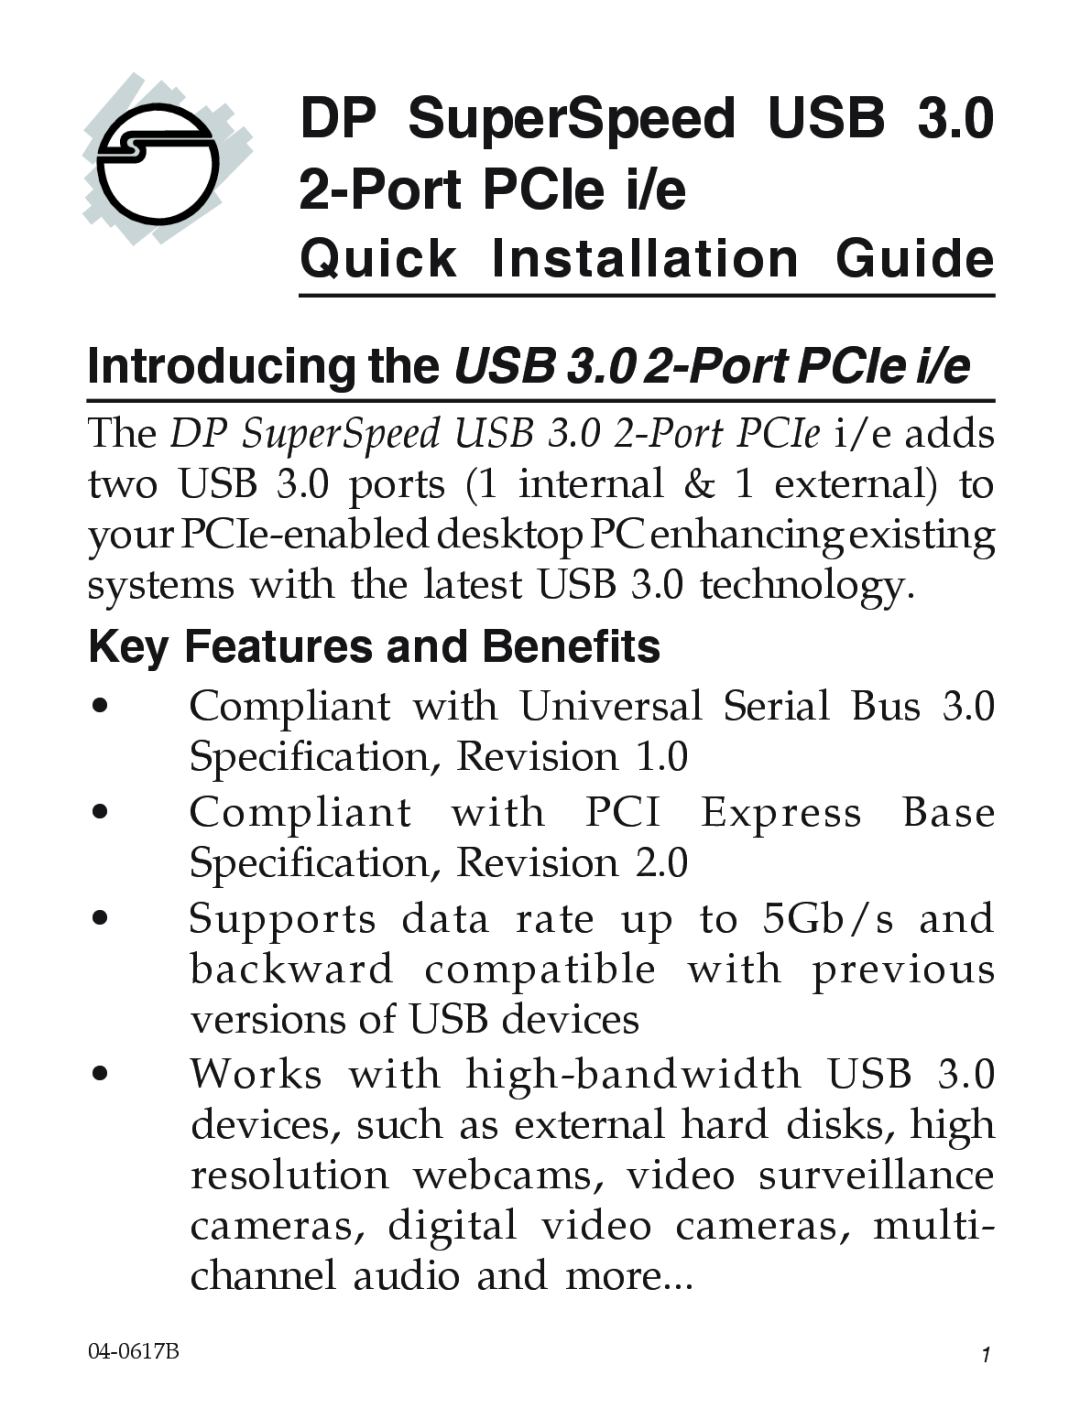 SIIG EX2101 manual Key Features and Benefits, DP SuperSpeed USB 3.0 2-Port PCIe i/e, Quick Installation Guide 